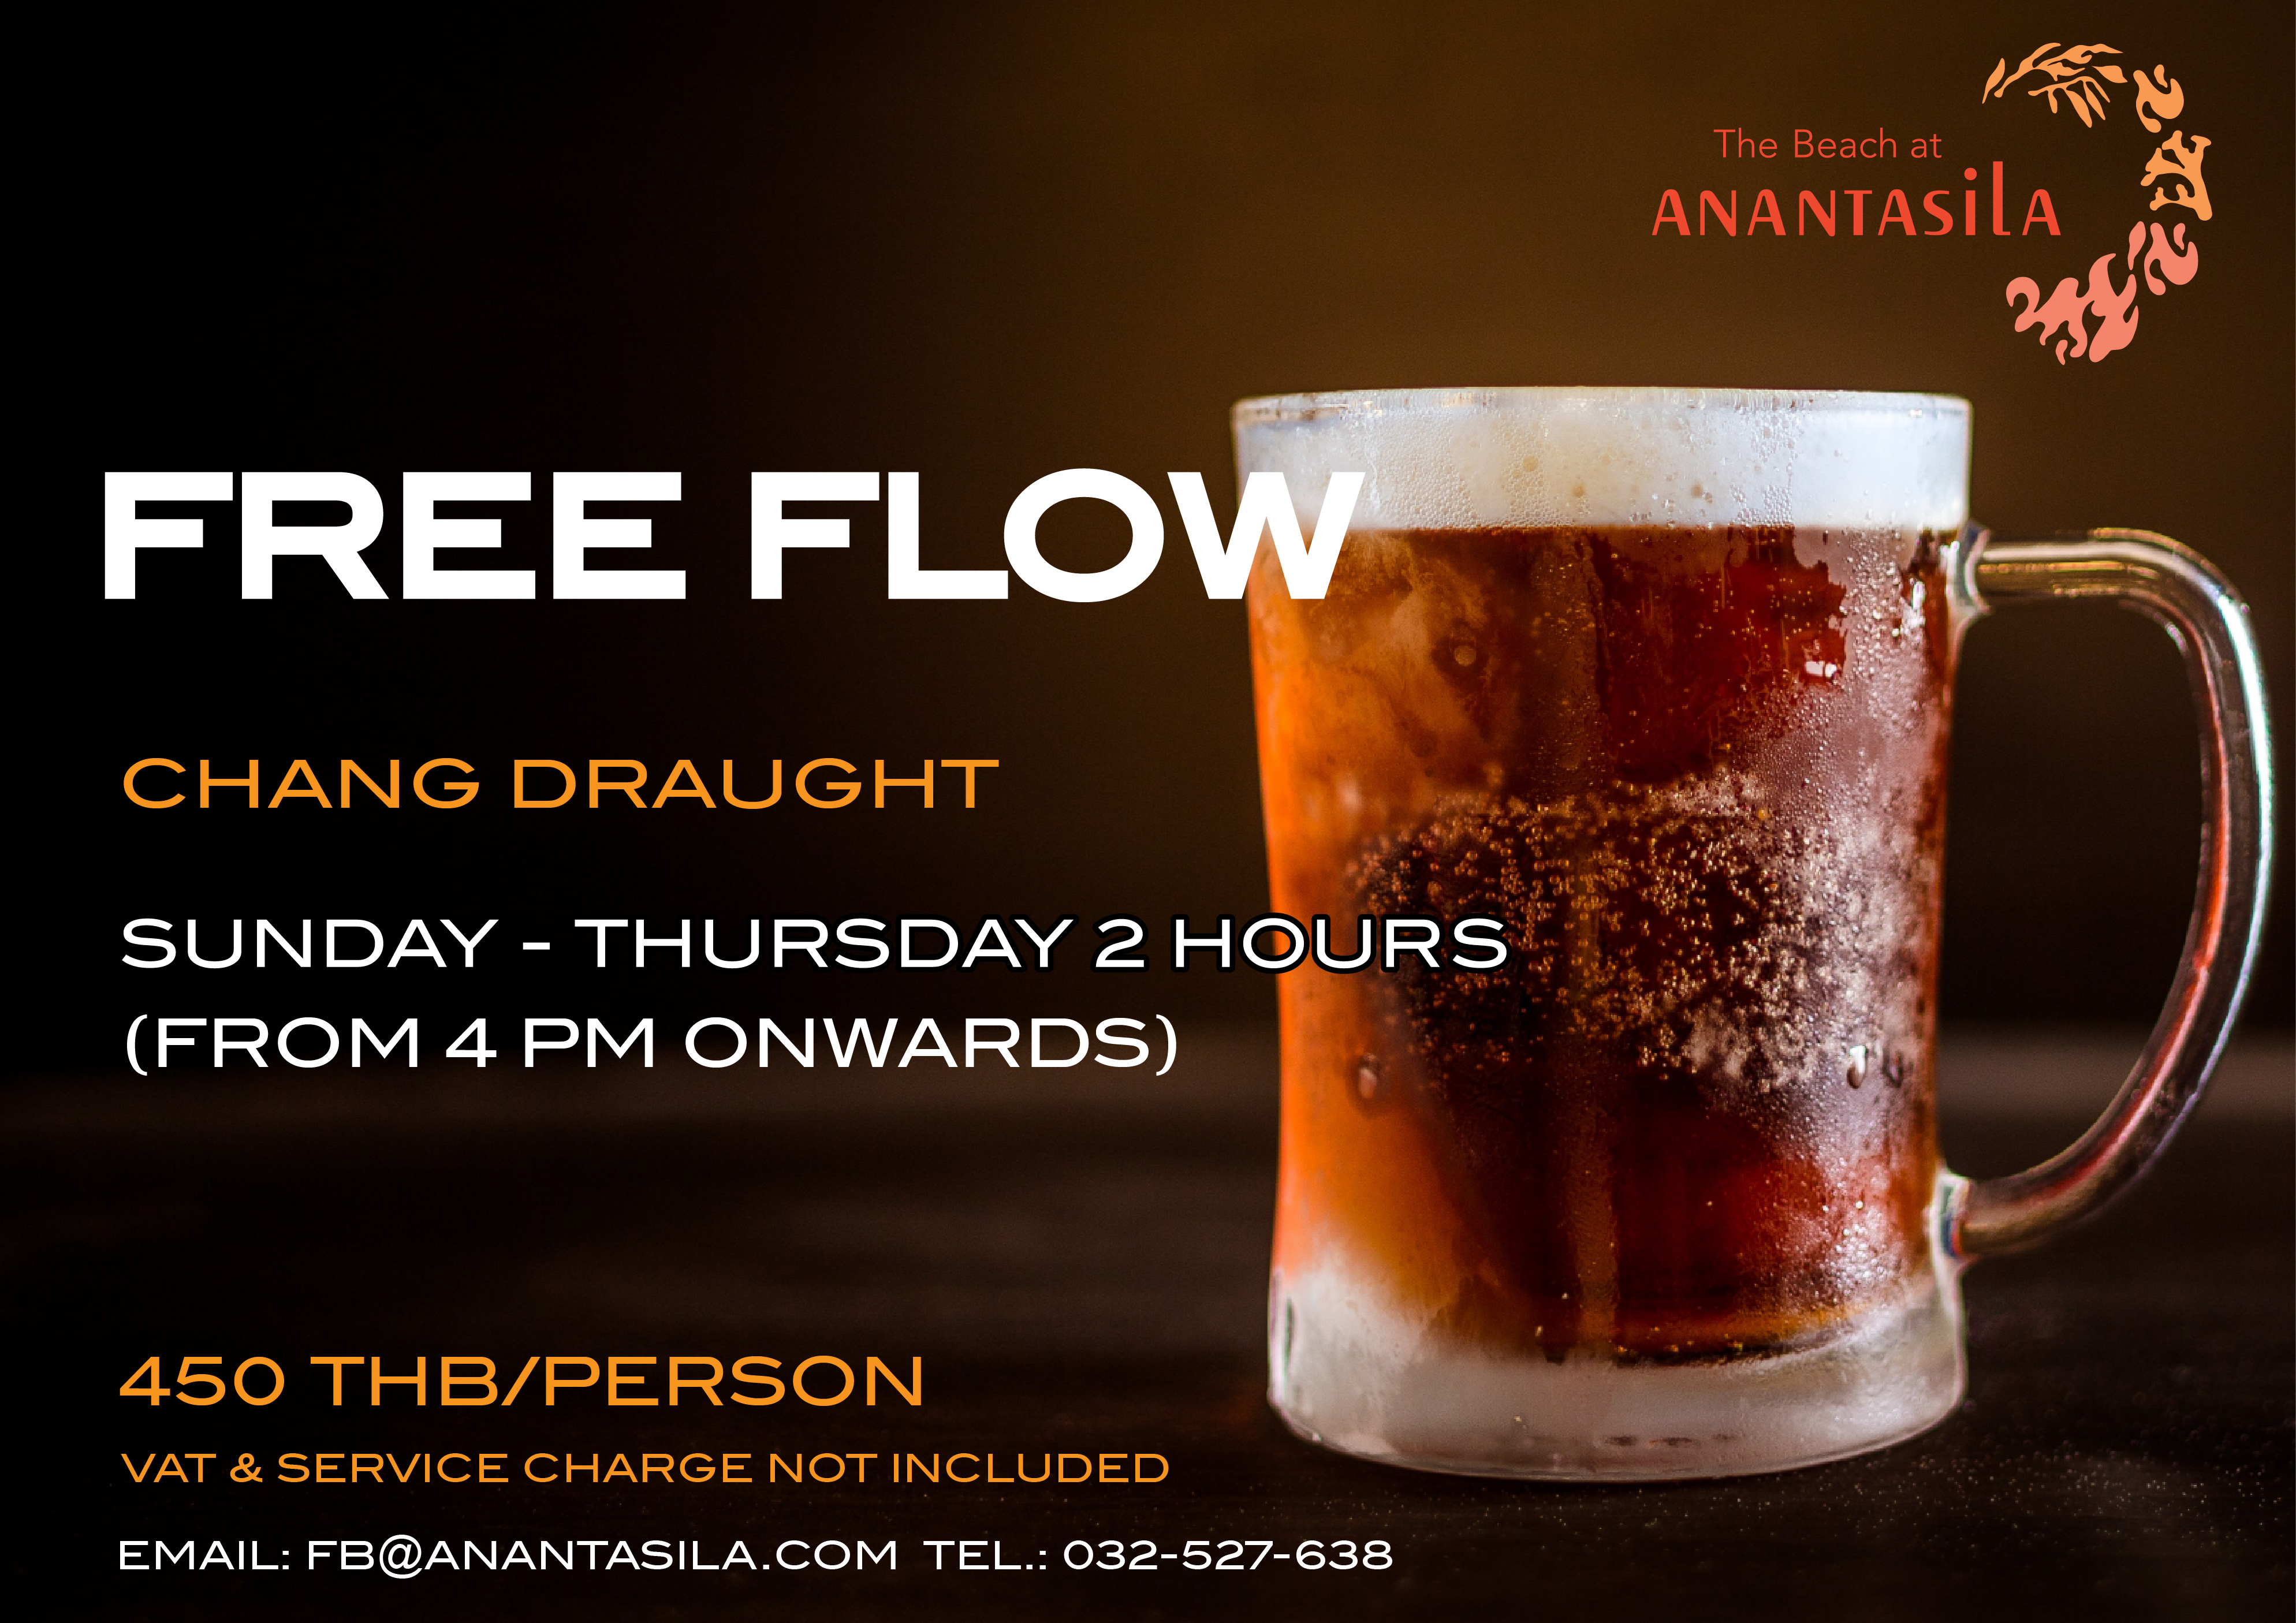 Promotion of Free Flow Chang Draught